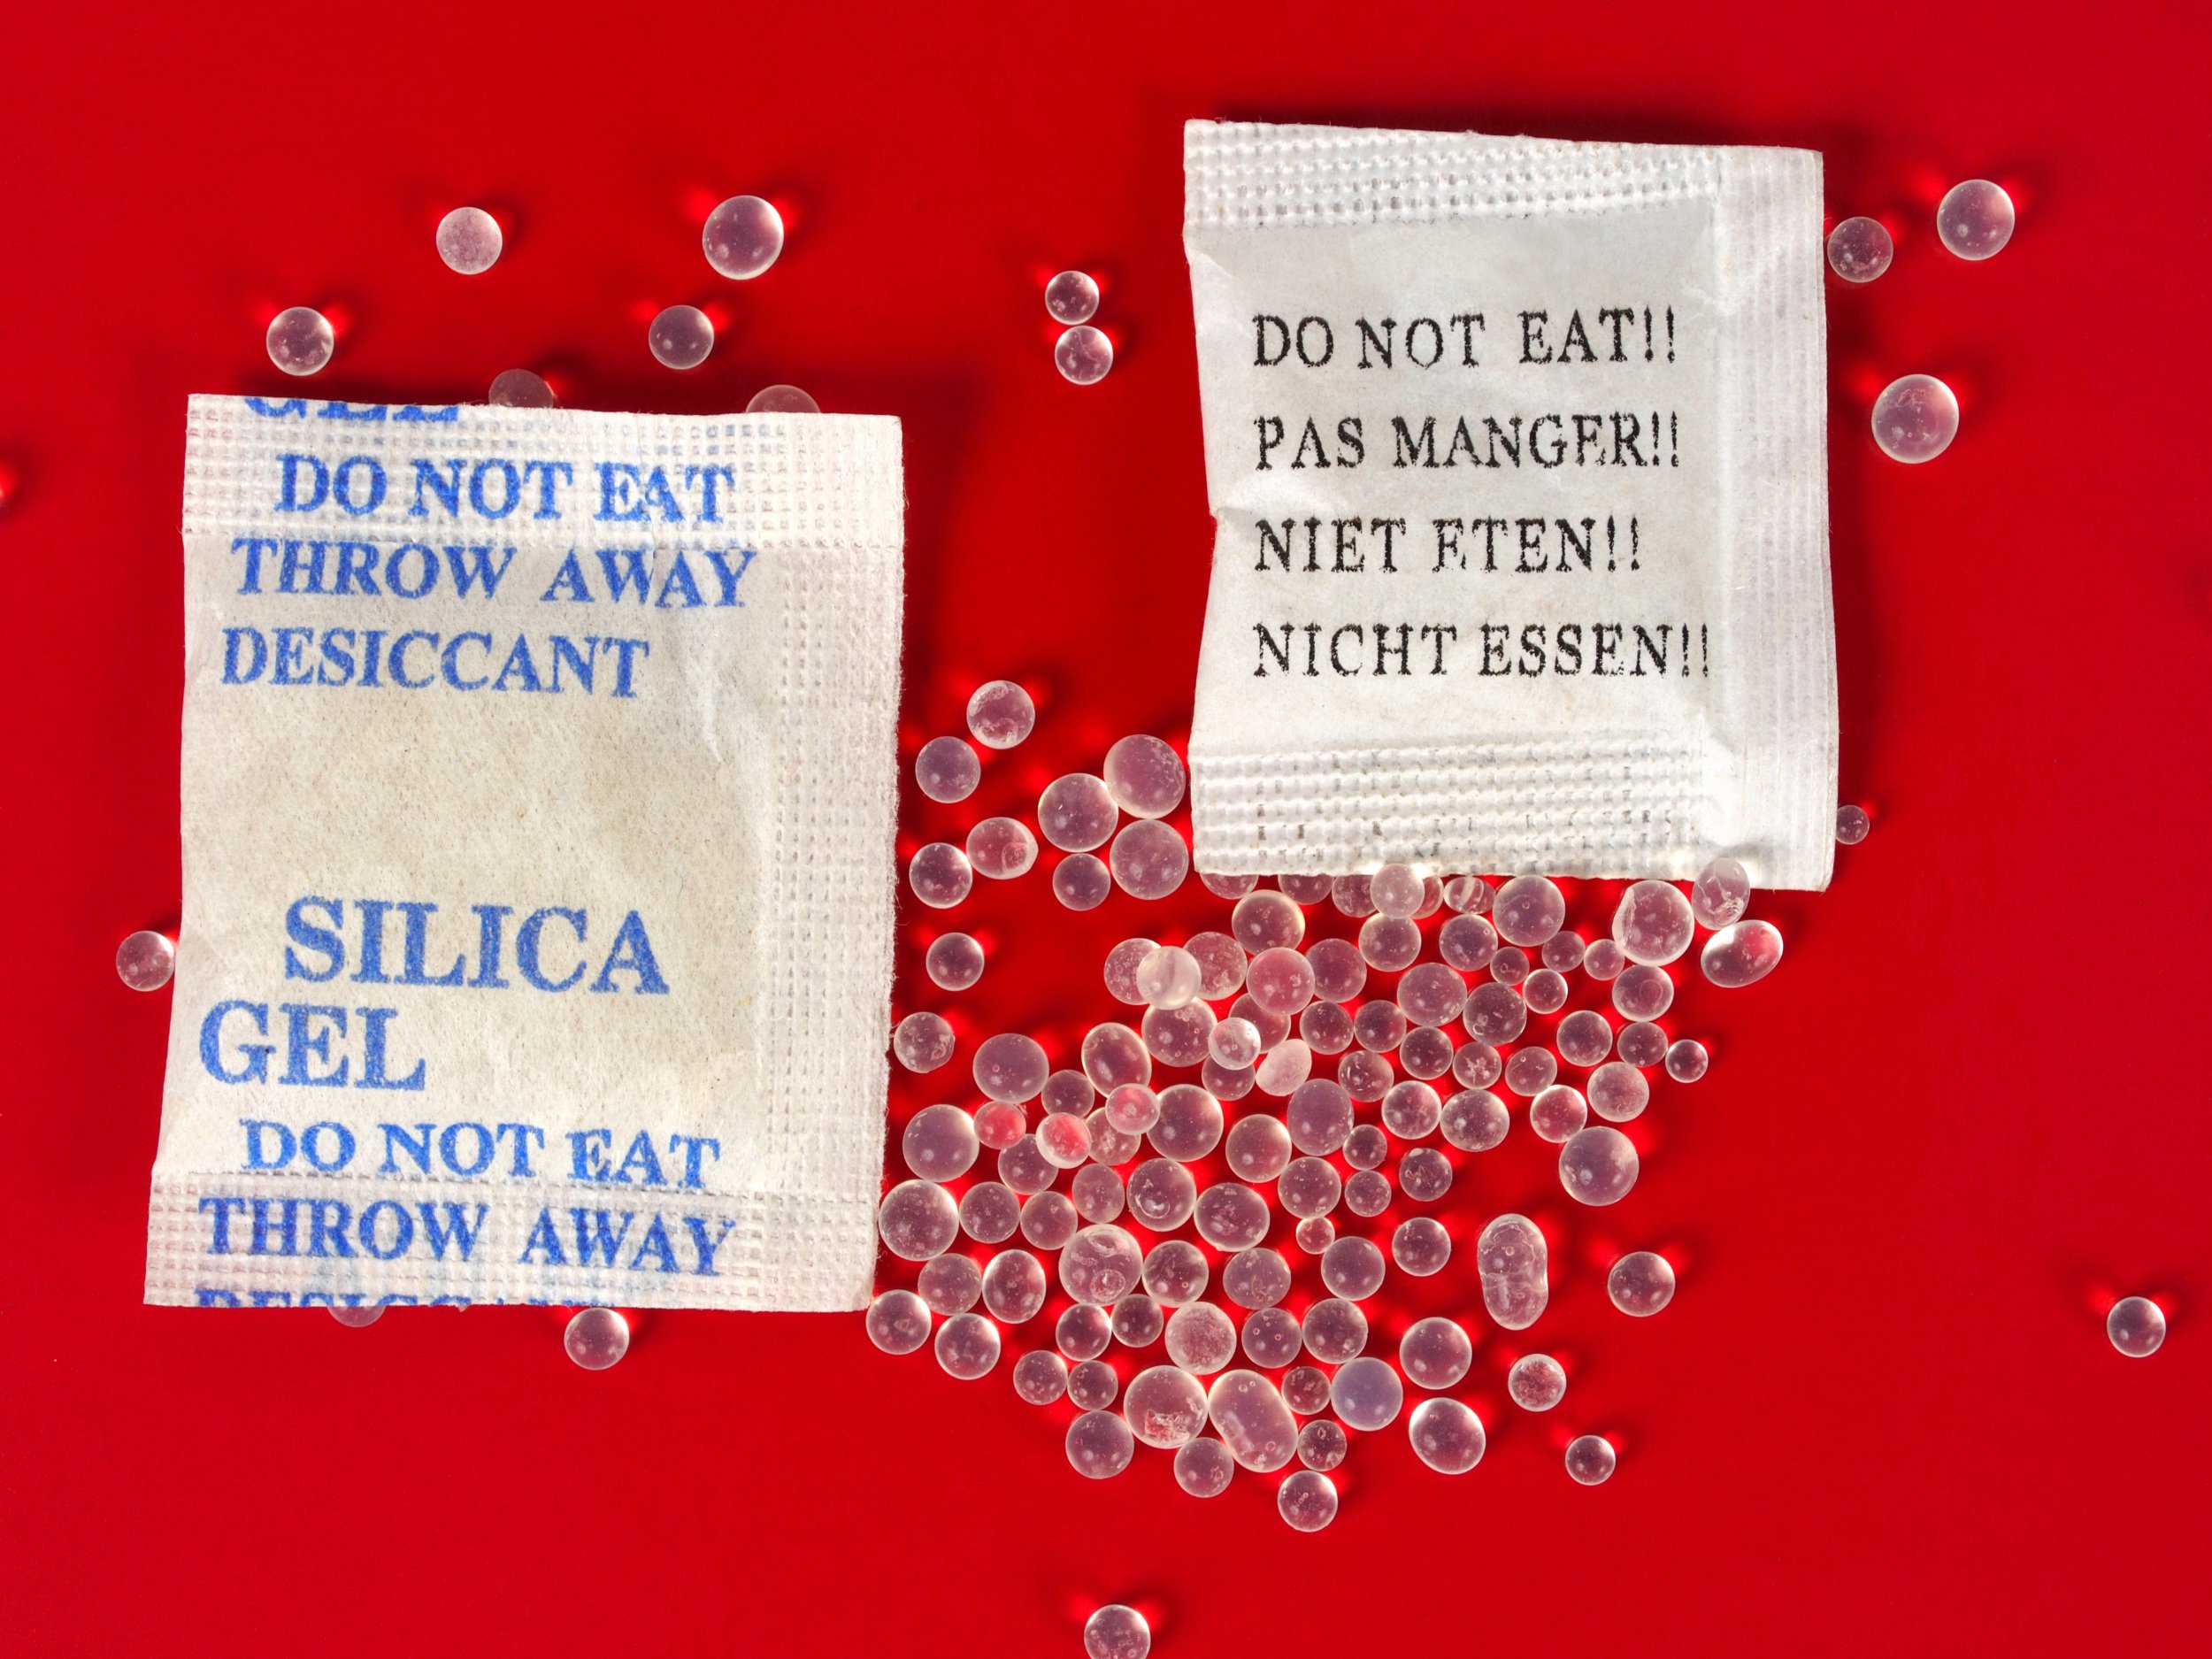 What is silica gel and why do I find little packets of it in